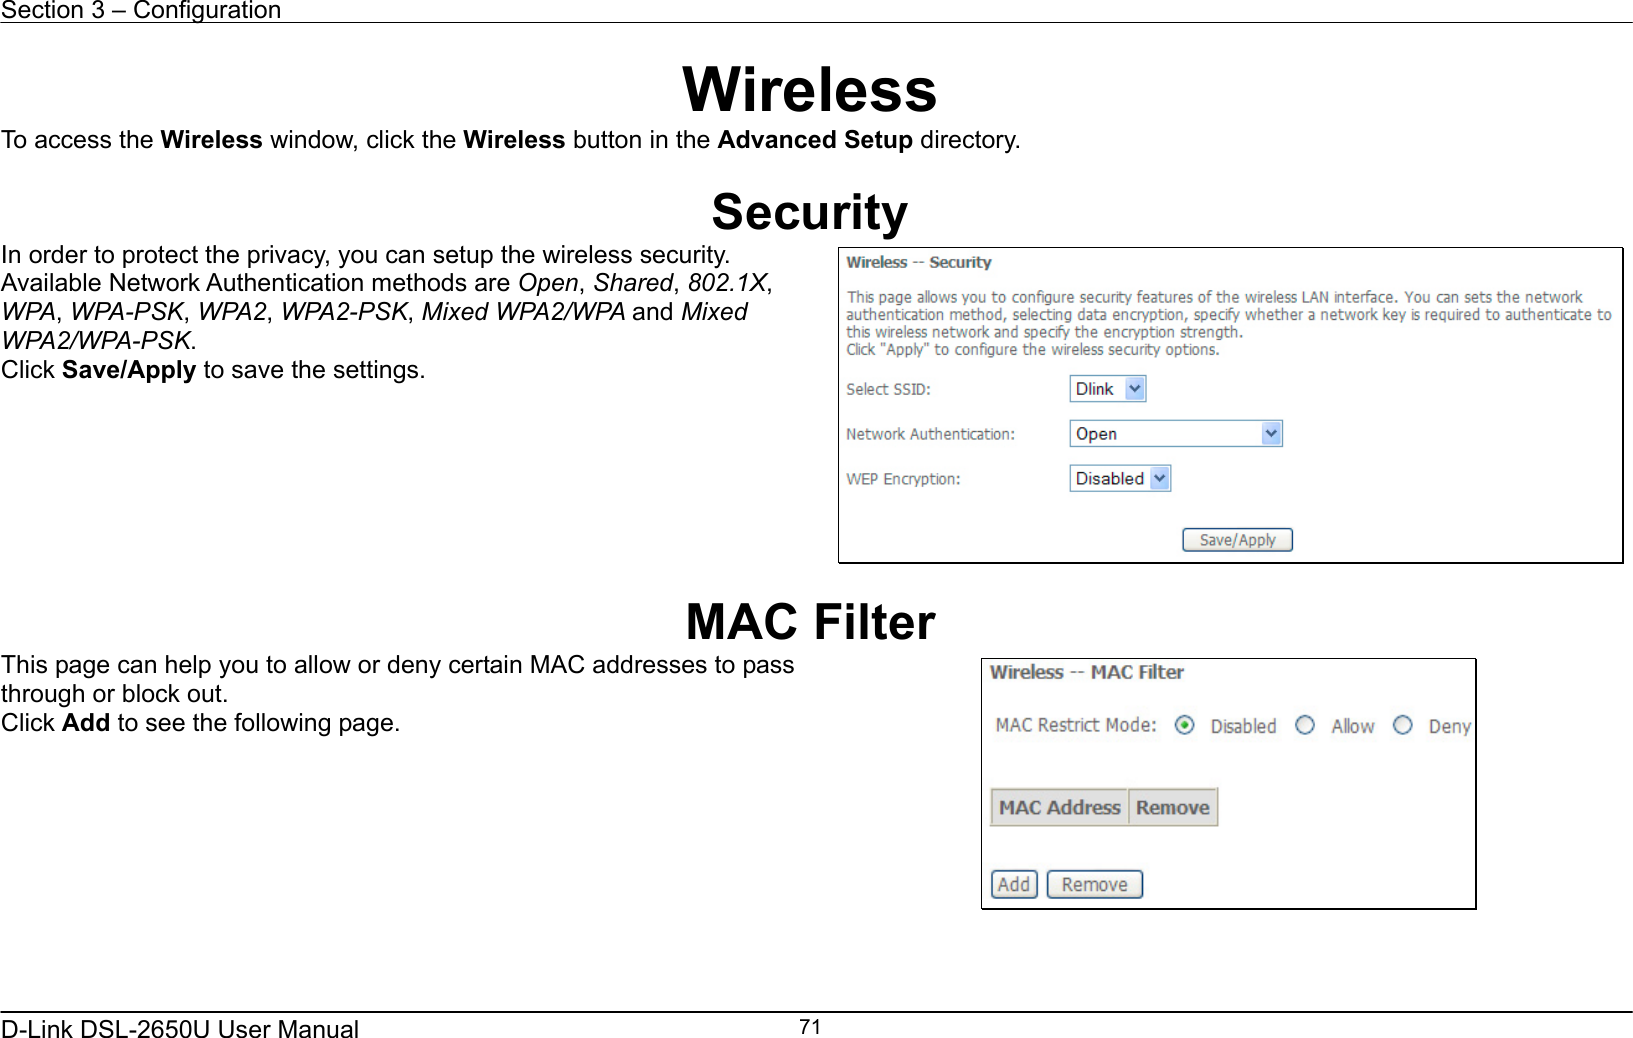 Section 3 – Configuration   D-Link DSL-2650U User Manual    71Wireless To access the Wireless window, click the Wireless button in the Advanced Setup directory.  Security In order to protect the privacy, you can setup the wireless security. Available Network Authentication methods are Open, Shared, 802.1X, WPA, WPA-PSK, WPA2, WPA2-PSK, Mixed WPA2/WPA and Mixed WPA2/WPA-PSK. Click Save/Apply to save the settings.    MAC Filter This page can help you to allow or deny certain MAC addresses to pass through or block out. Click Add to see the following page.    